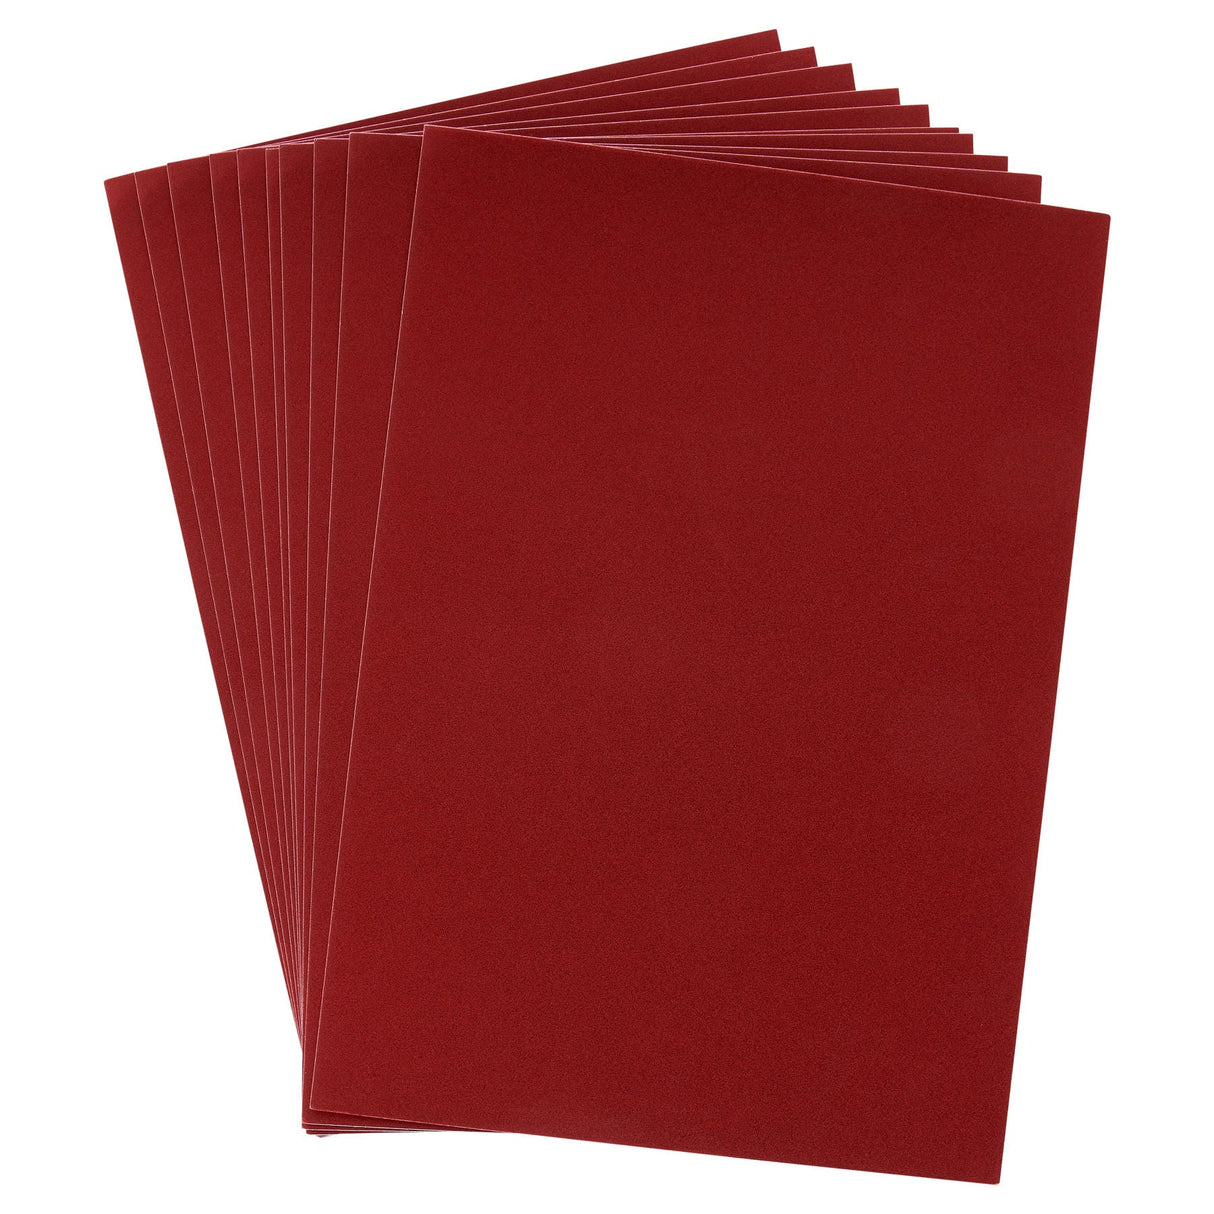 Premier Activity A4 Glitter Card- 250 gsm - Red - 10 Sheets-Craft Paper & Card-Premier | Buy Online at Stationery Shop